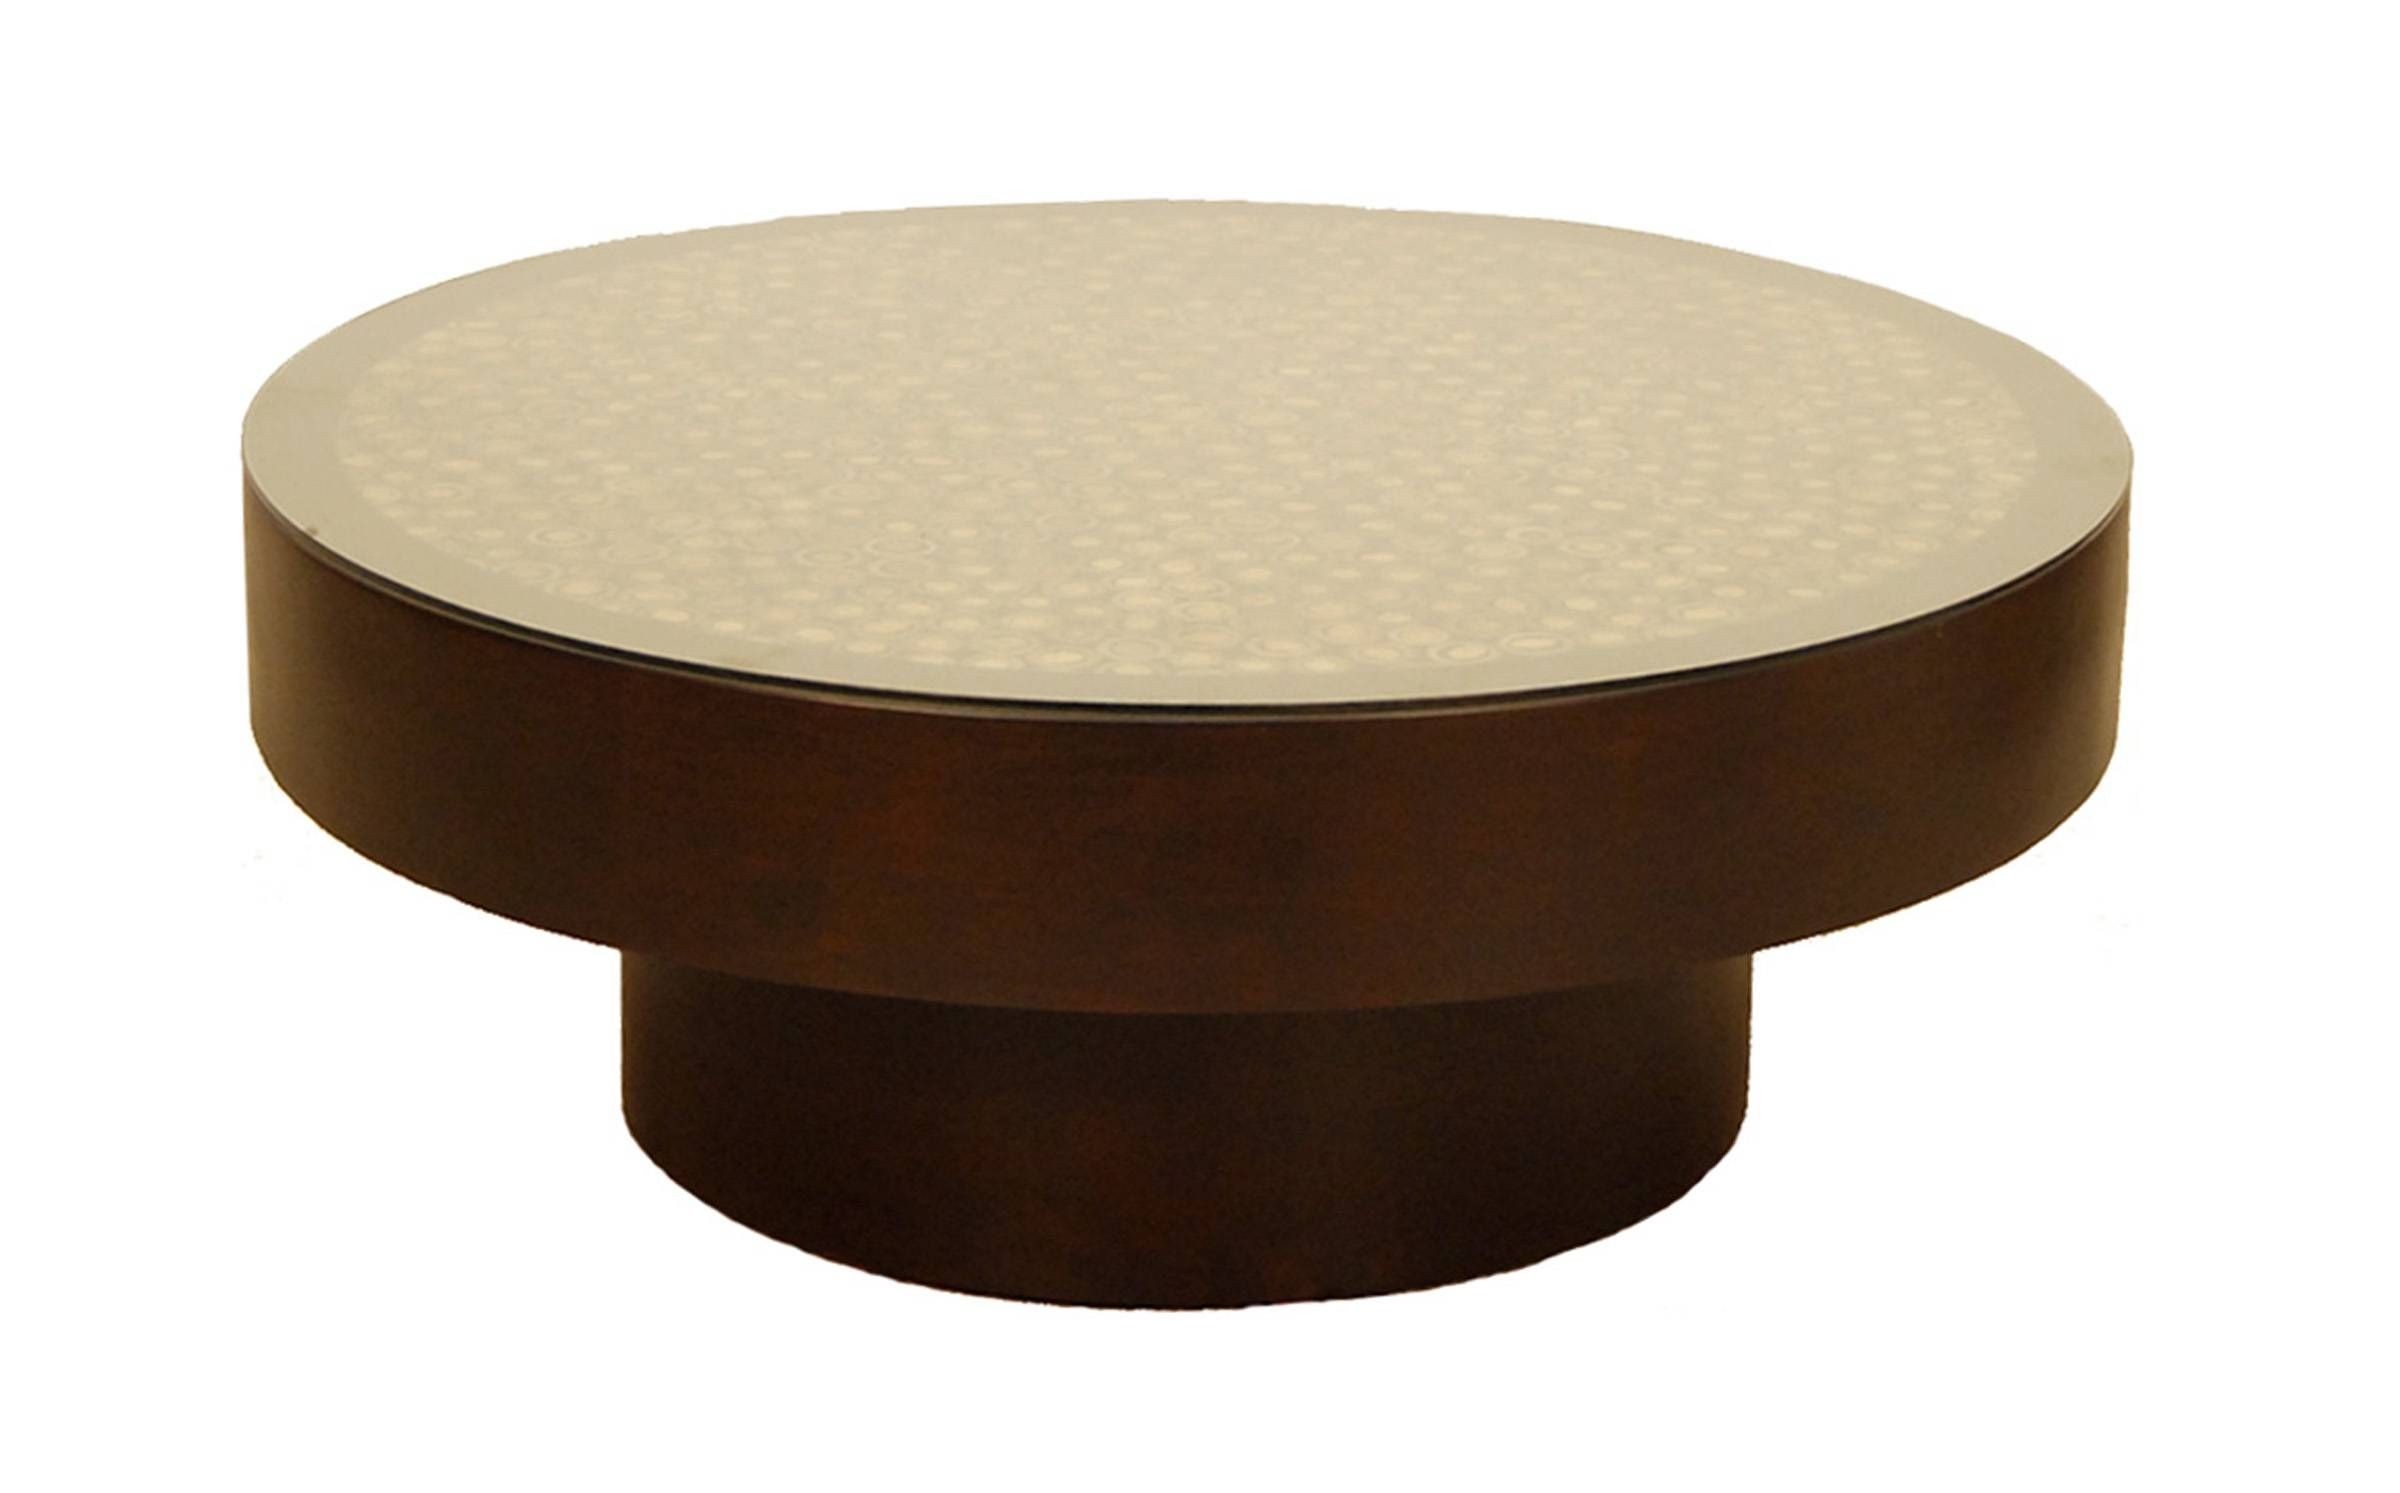 Popular Of Round Dark Wood Coffee Table With Barcelona Polished Within Large Round Low Coffee Tables (View 4 of 30)